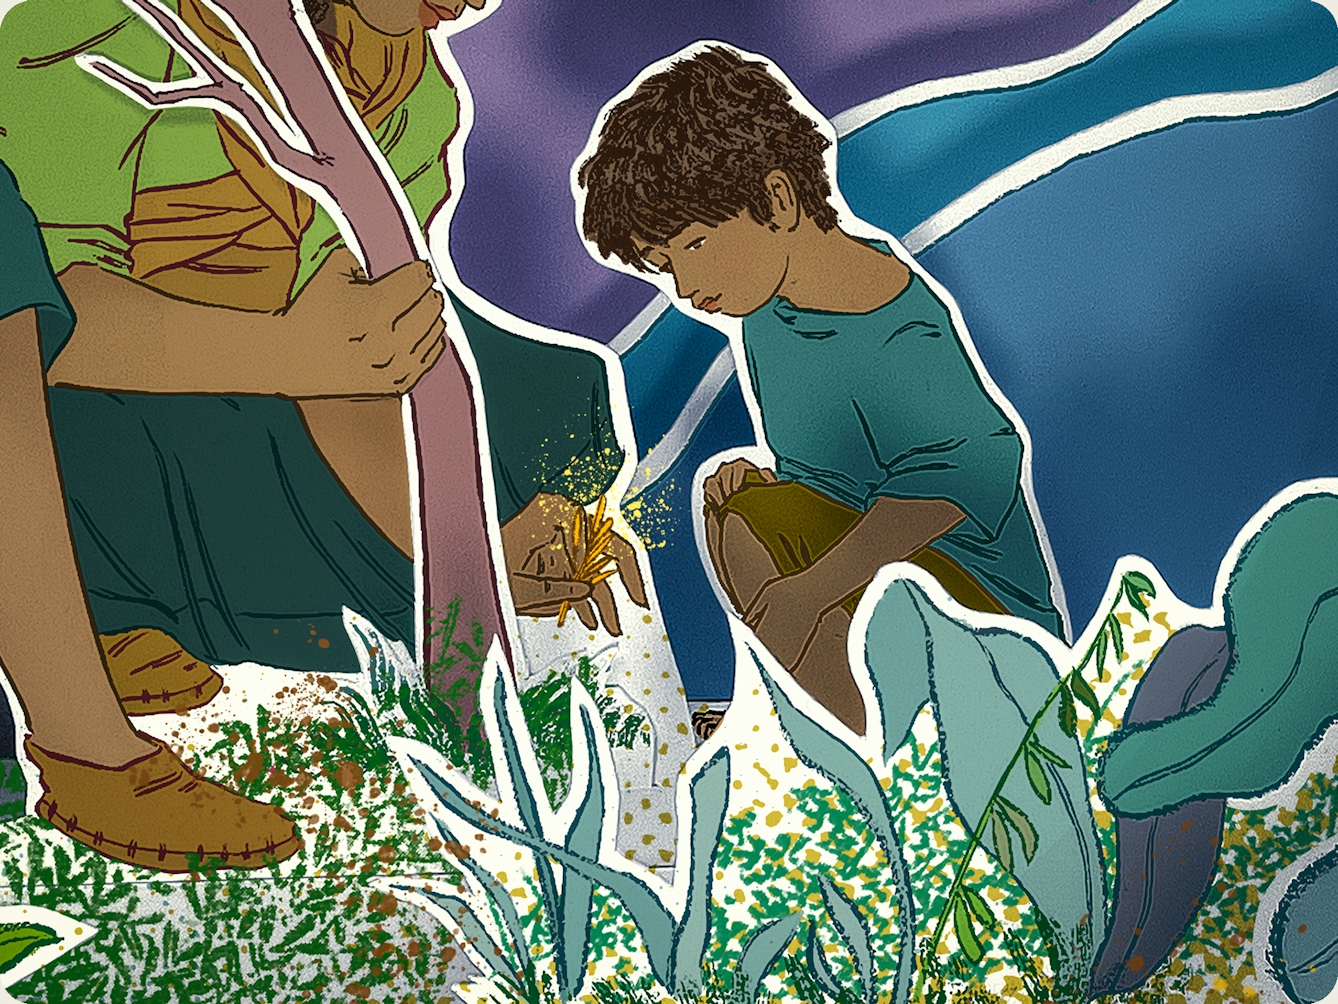 Photograph of a papercut 3D artwork. Detail from a larger artwork which shows a woman wearing a hat crouched down under a small tree, showing a small delicate plant to her young son who is also crouching down. They are surrounded by a Peruvian landscape of foliage and recessing silhouetted hillsides. The overall hues are blues, greens, purples and mauves.